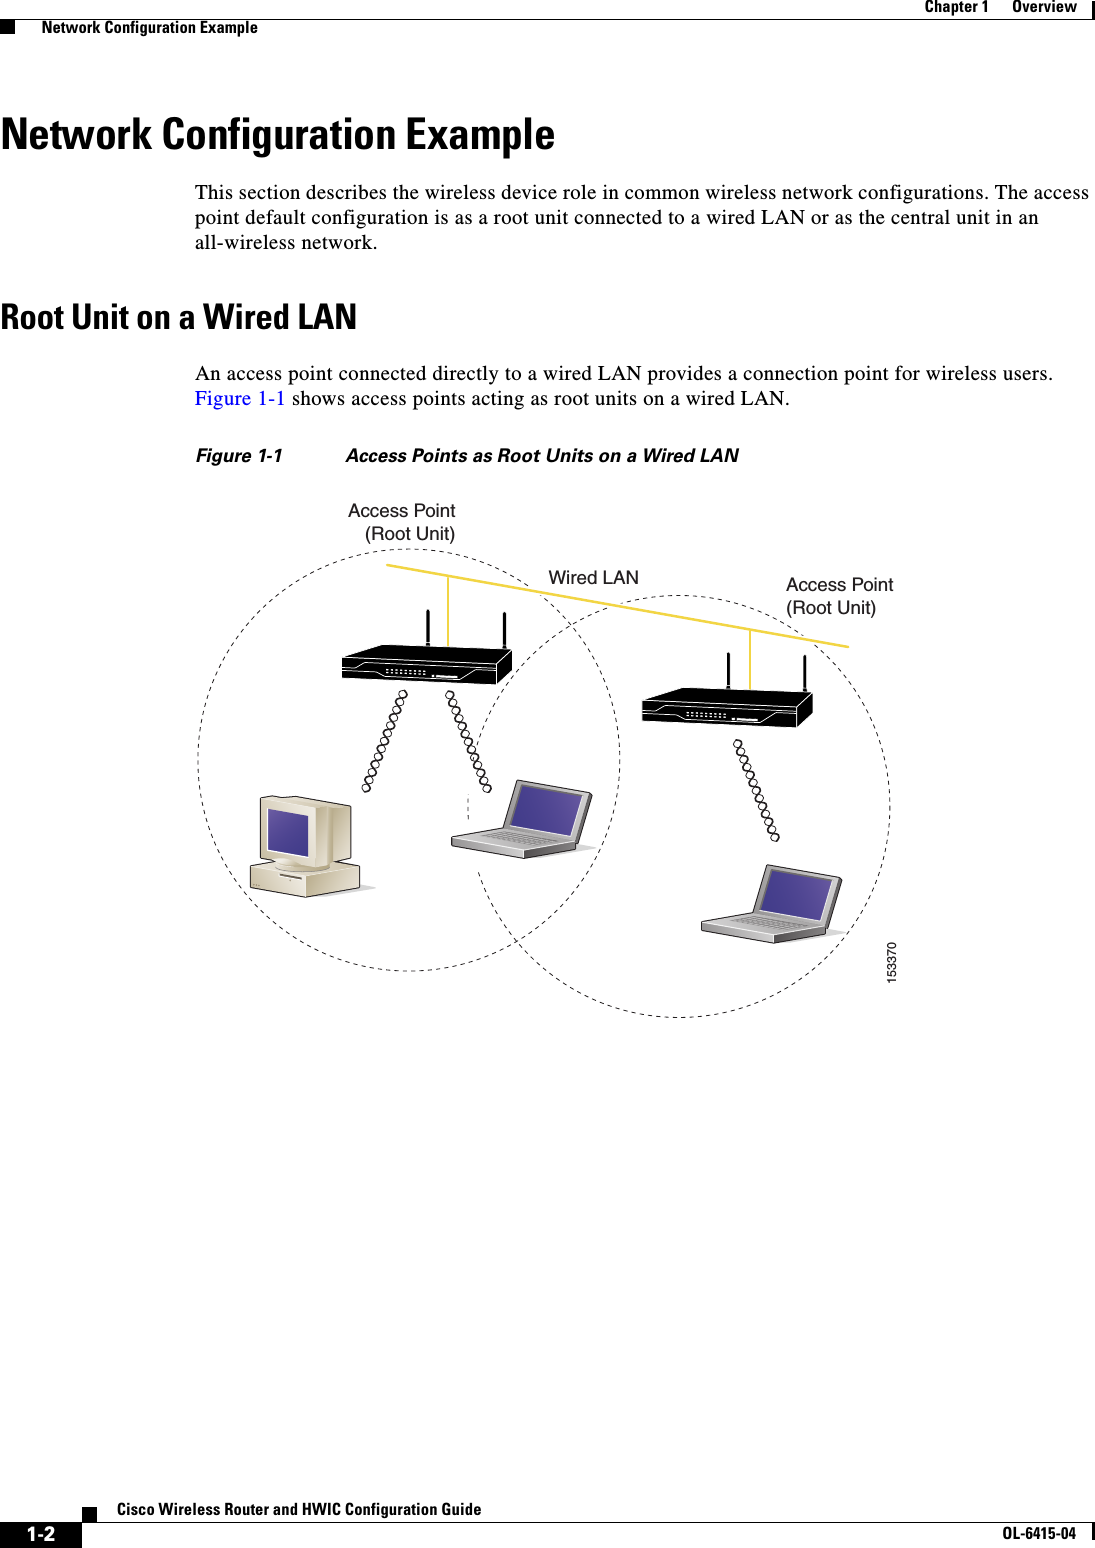  1-2Cisco Wireless Router and HWIC Configuration GuideOL-6415-04Chapter 1      Overview  Network Configuration ExampleNetwork Configuration ExampleThis section describes the wireless device role in common wireless network configurations. The access point default configuration is as a root unit connected to a wired LAN or as the central unit in an all-wireless network.Root Unit on a Wired LANAn access point connected directly to a wired LAN provides a connection point for wireless users. Figure 1-1 shows access points acting as root units on a wired LAN.Figure 1-1 Access Points as Root Units on a Wired LANAccess Point(Root Unit)Access Point(Root Unit)153370Wired LAN